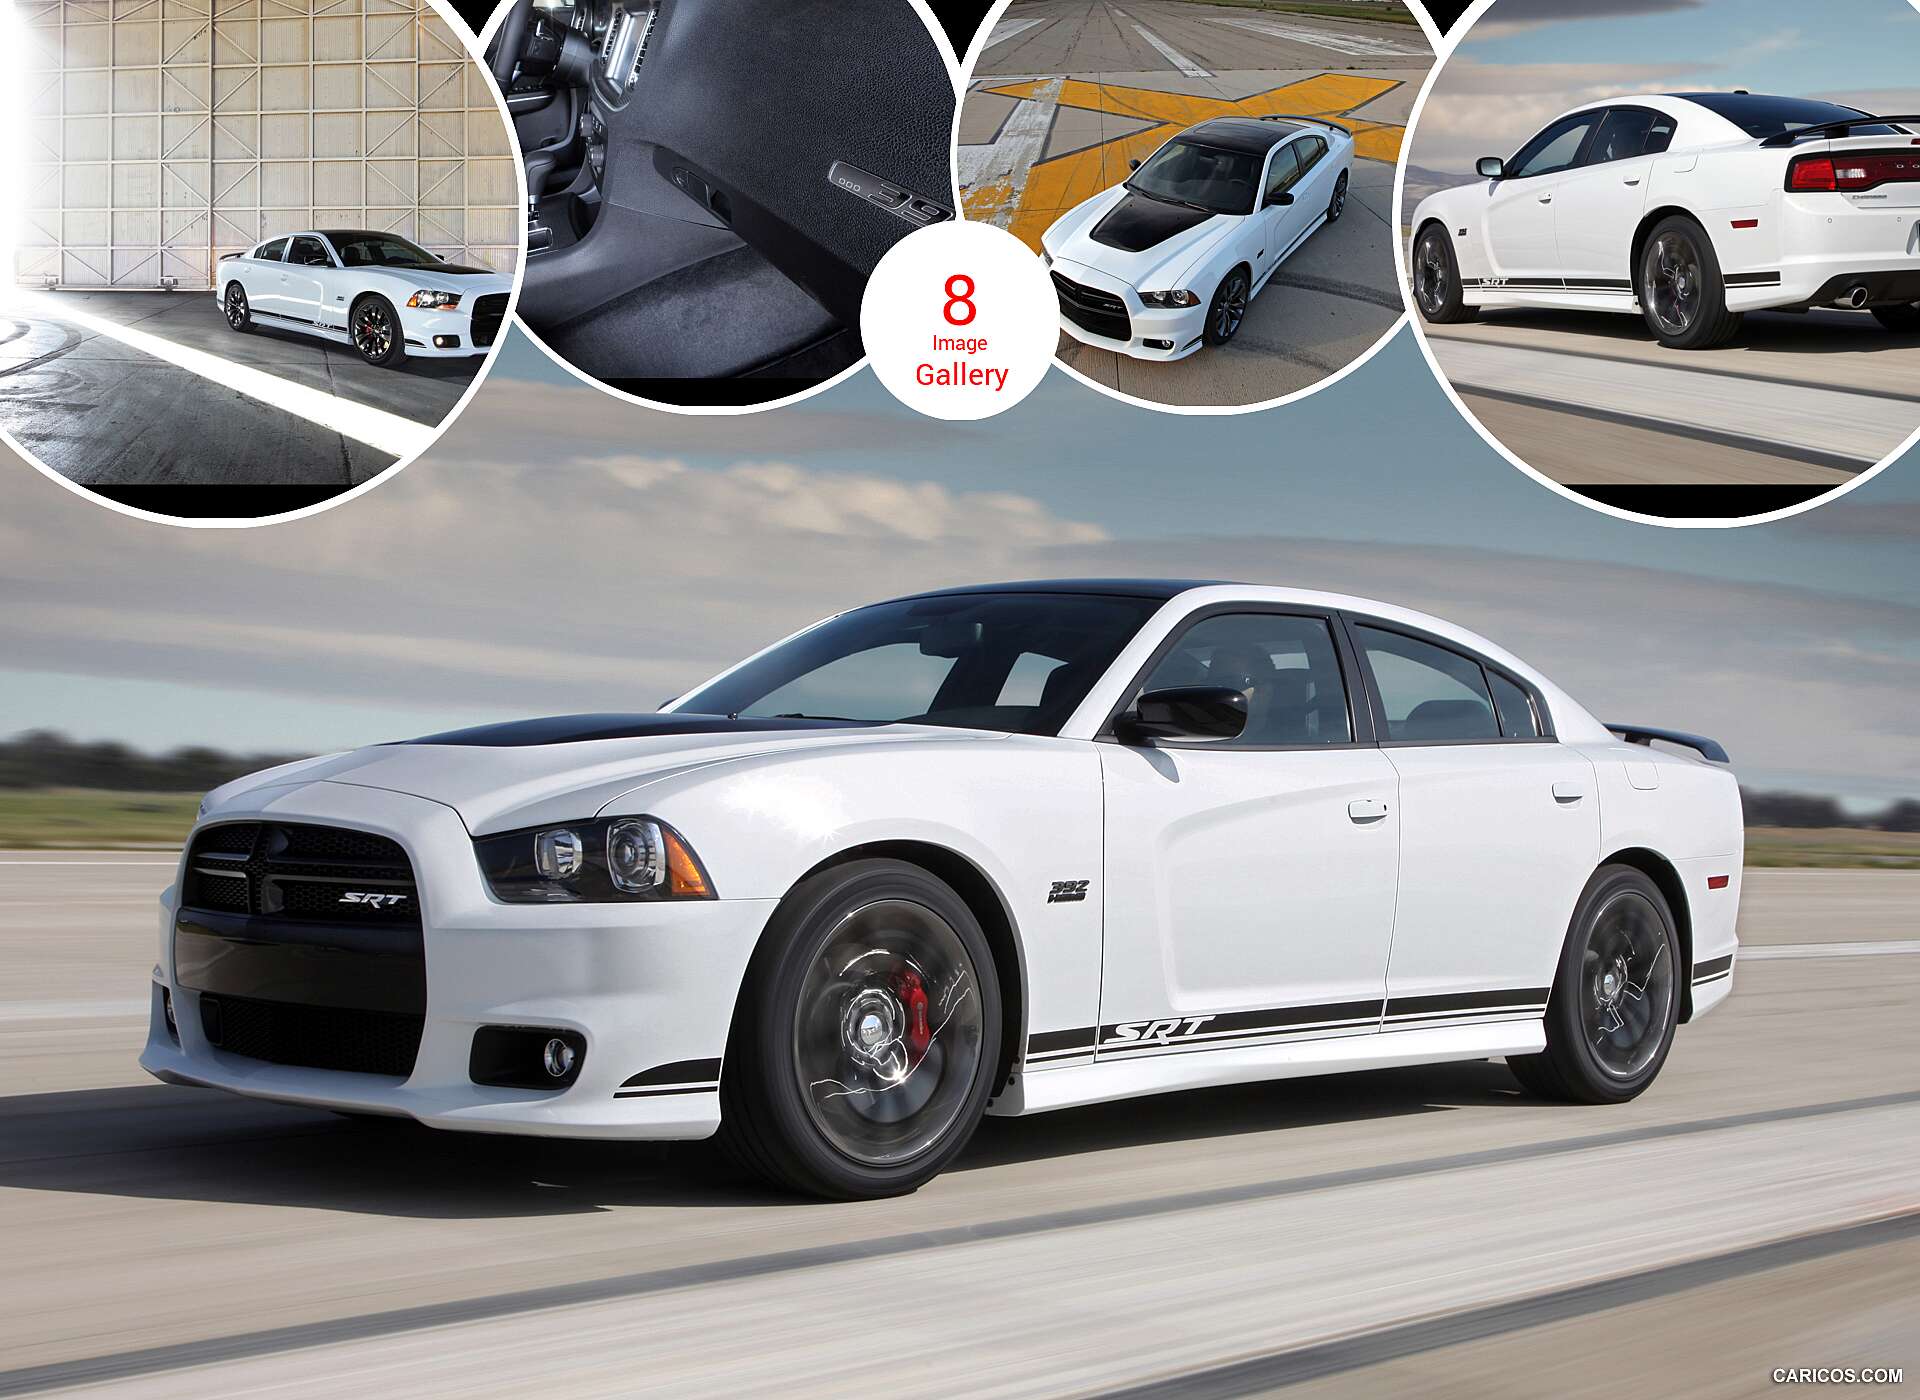 2013 Dodge Charger SRT8 392 Appearance Package